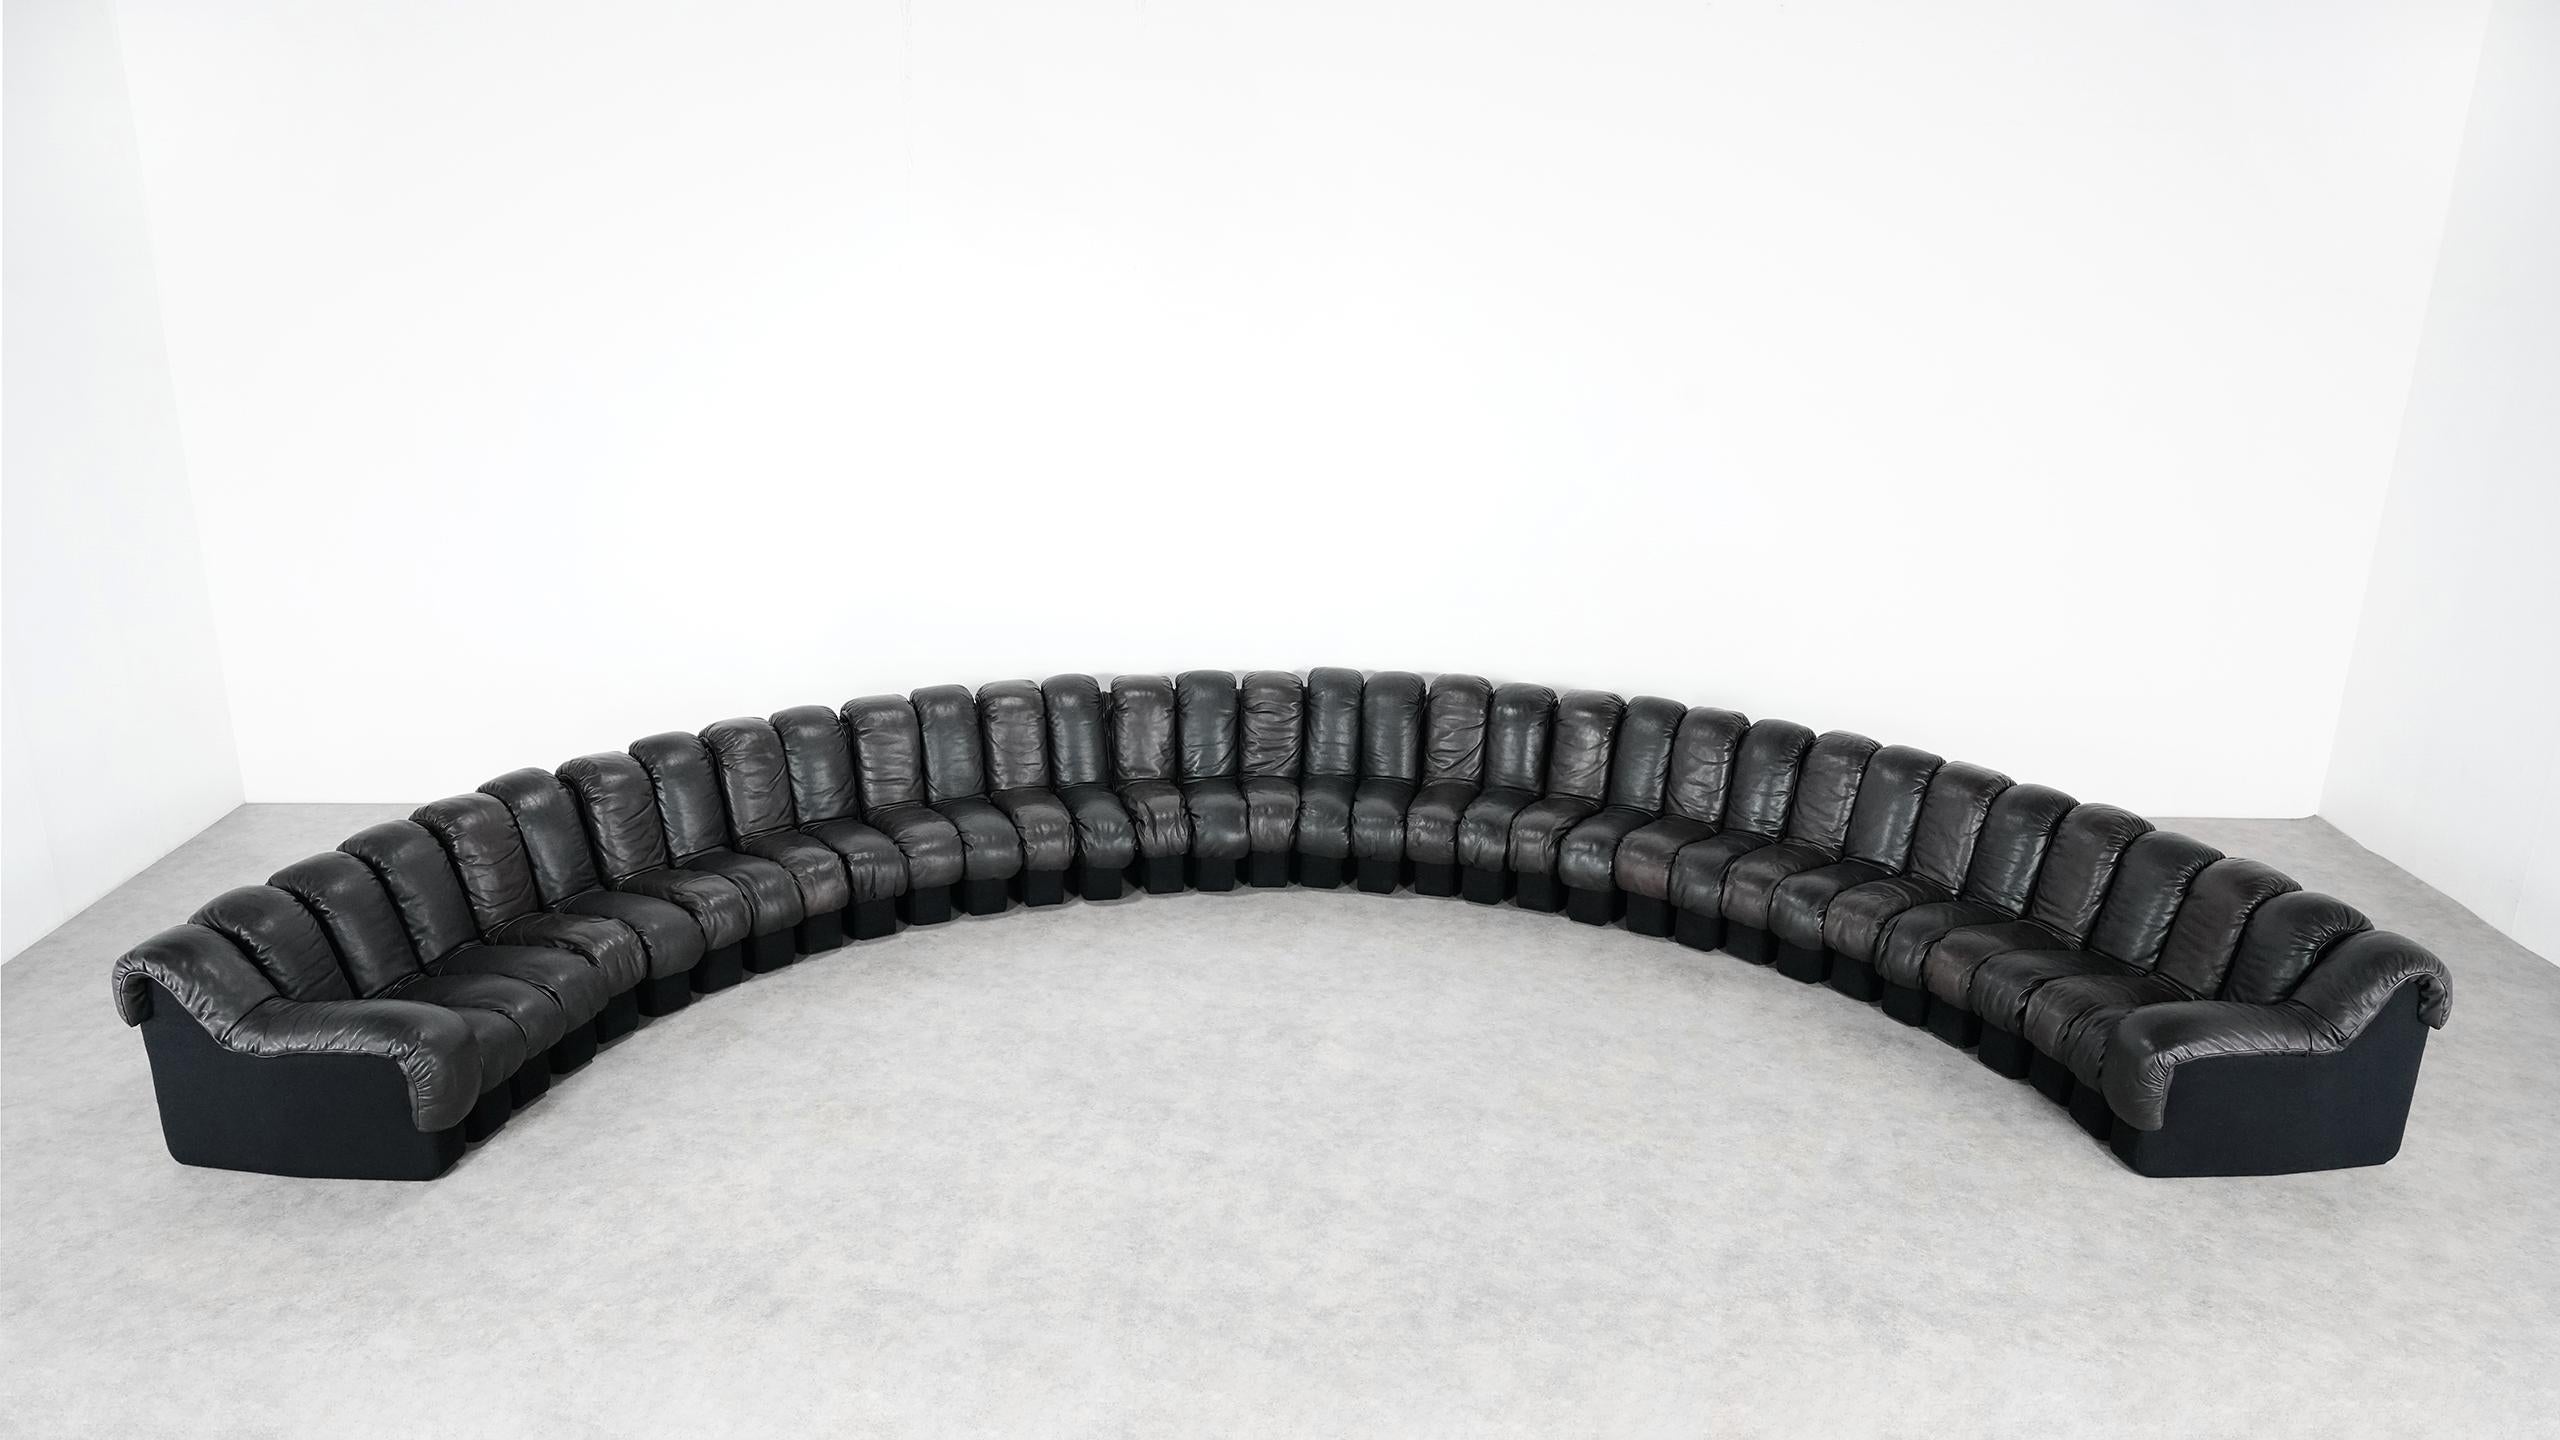 Late 20th Century De Sede DS 600 Snake Sofa by Ueli Berger, 1972 Black & Brown Leather 36 Elemens